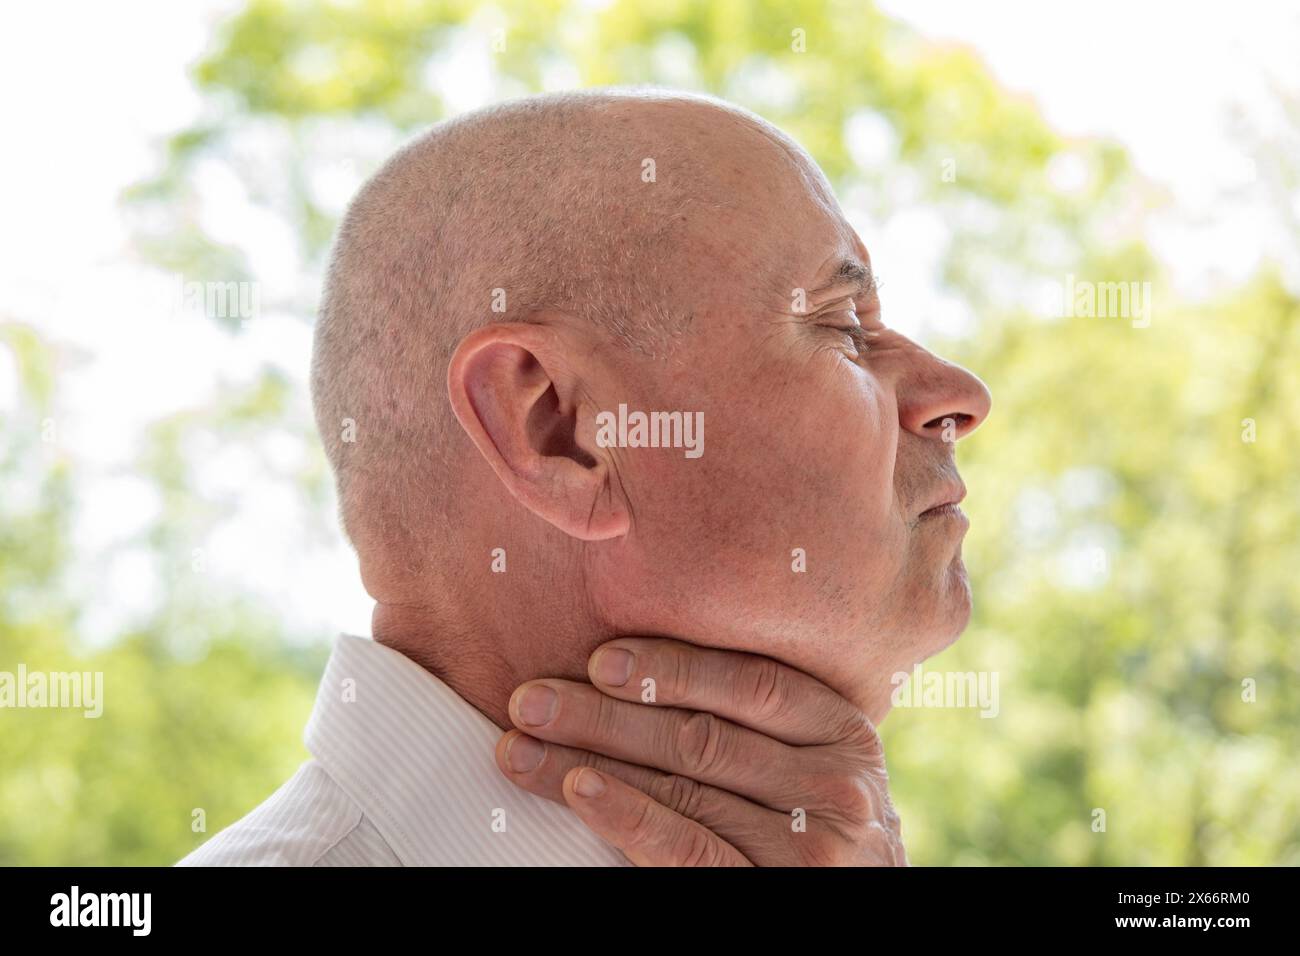 Elderly man 60-65 years, old patient holding affected area, experiencing throat pain, Health concern, loss of voice, various causes, medical attention Stock Photo